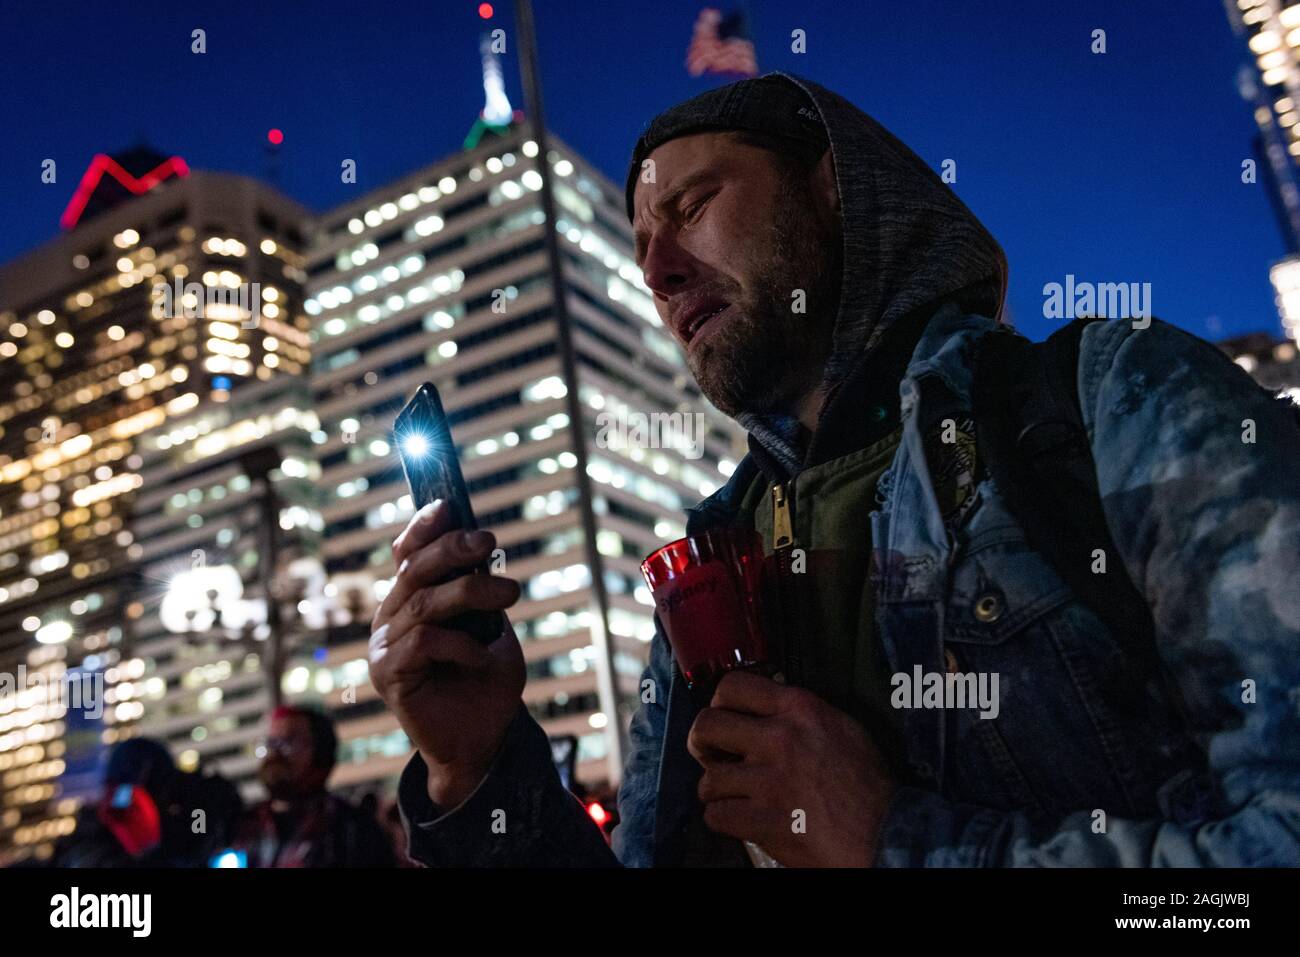 Philadelphia, USA. 19th December, 2019. Philadelphians gathered in below freezing temperatures for an annual Homeless Memorial to honor the lives of street citizens who have died in the past year and called on all Americans to commit to ending homelessness. Credit: Chris Baker Evens / Alamy Live News. Stock Photo